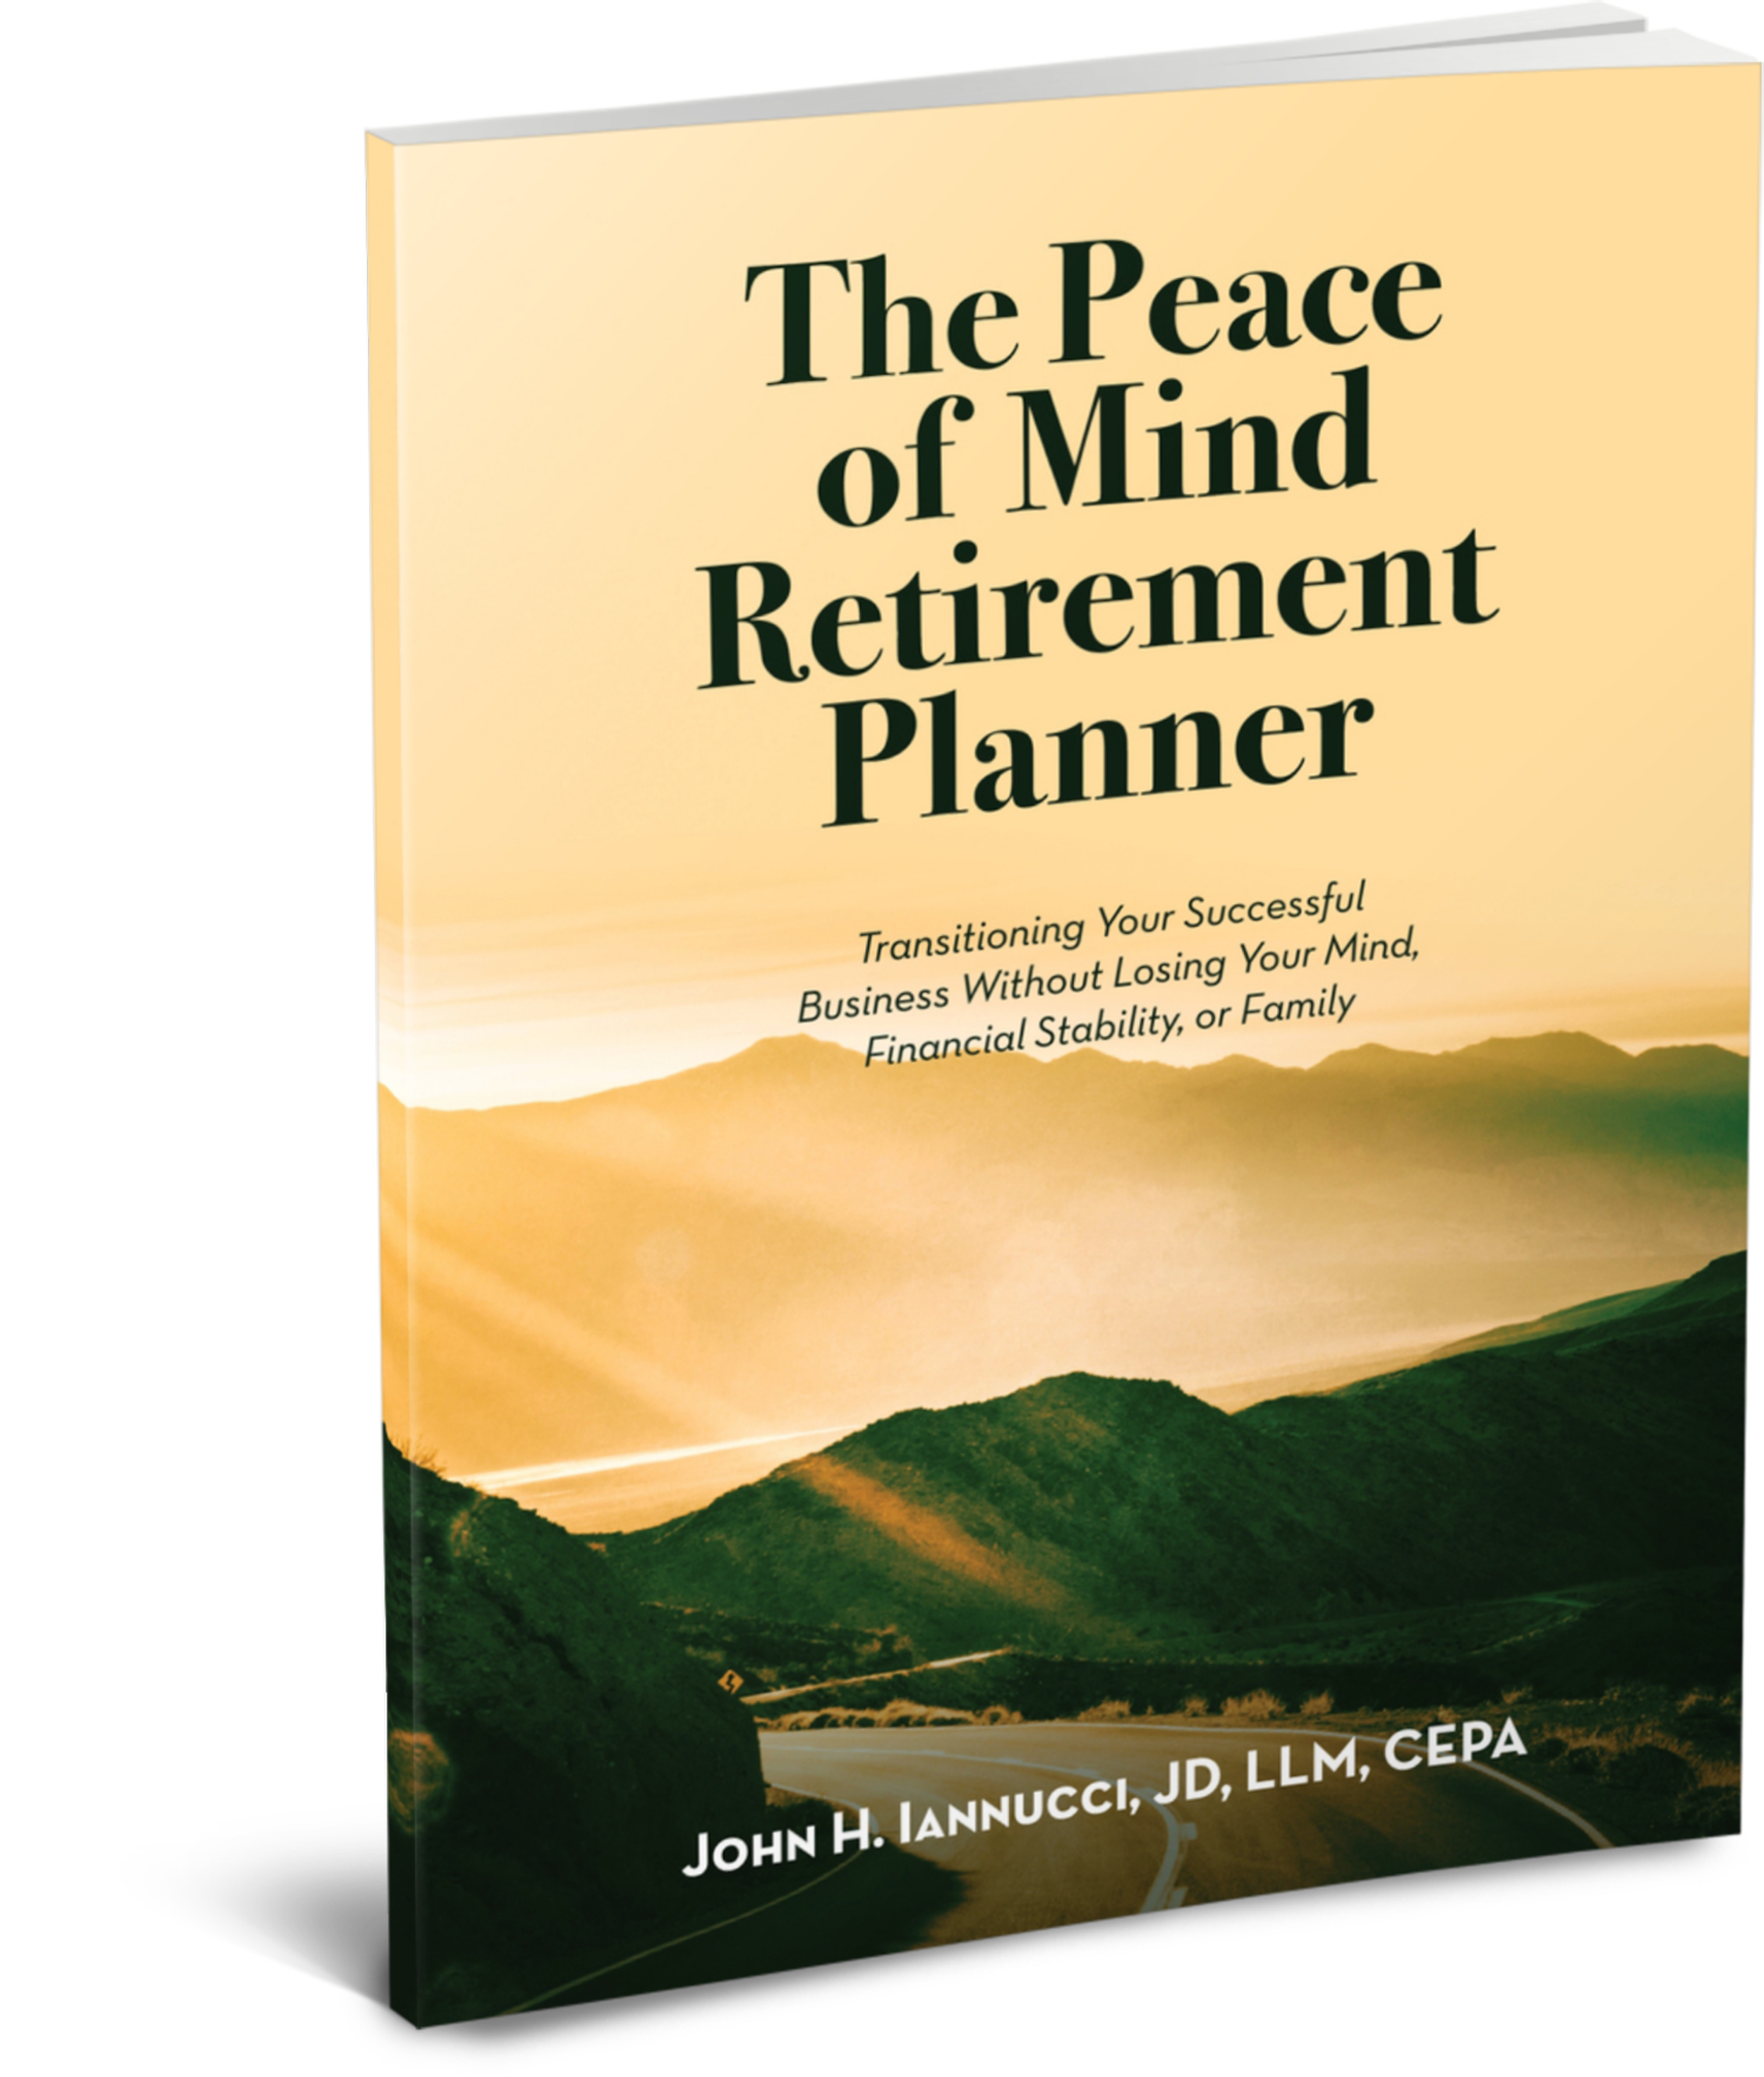  The Peace of Mind Retirement Planner Originally known as a trusted legal partner, John shares how his early relationships led to the initial, unexpected success in the financial services world, and as his approach resonated with clients, referrals s